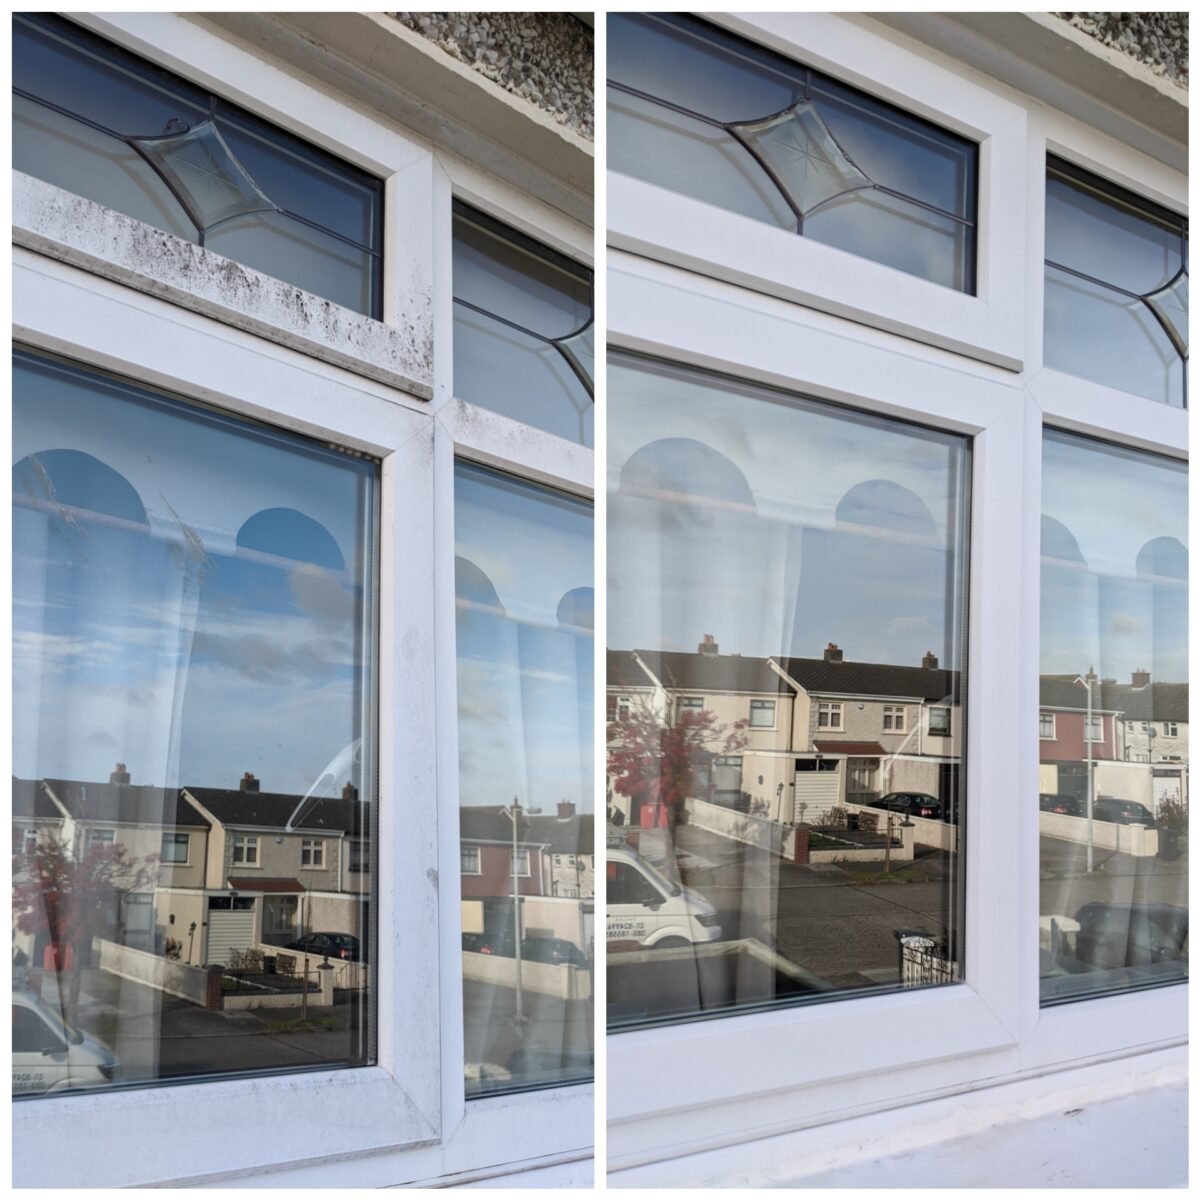 The Practical Benefits of Commercial Window Cleaning for Commercial Spaces